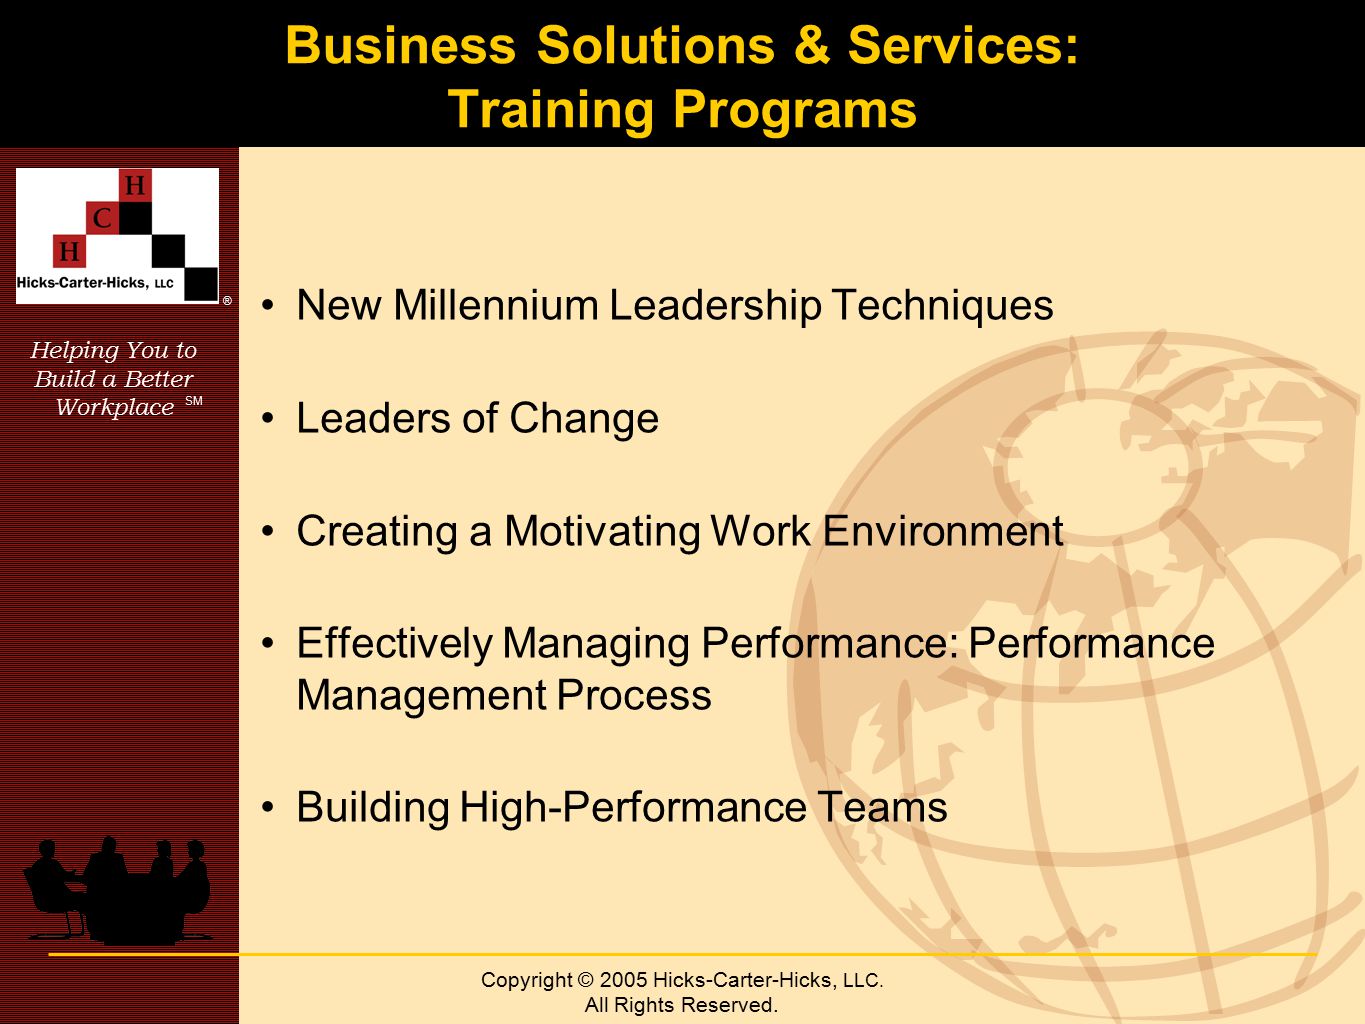 Helping You to Build a Better Workplace SM ® Copyright © 2005 Hicks-Carter-Hicks, LLC.